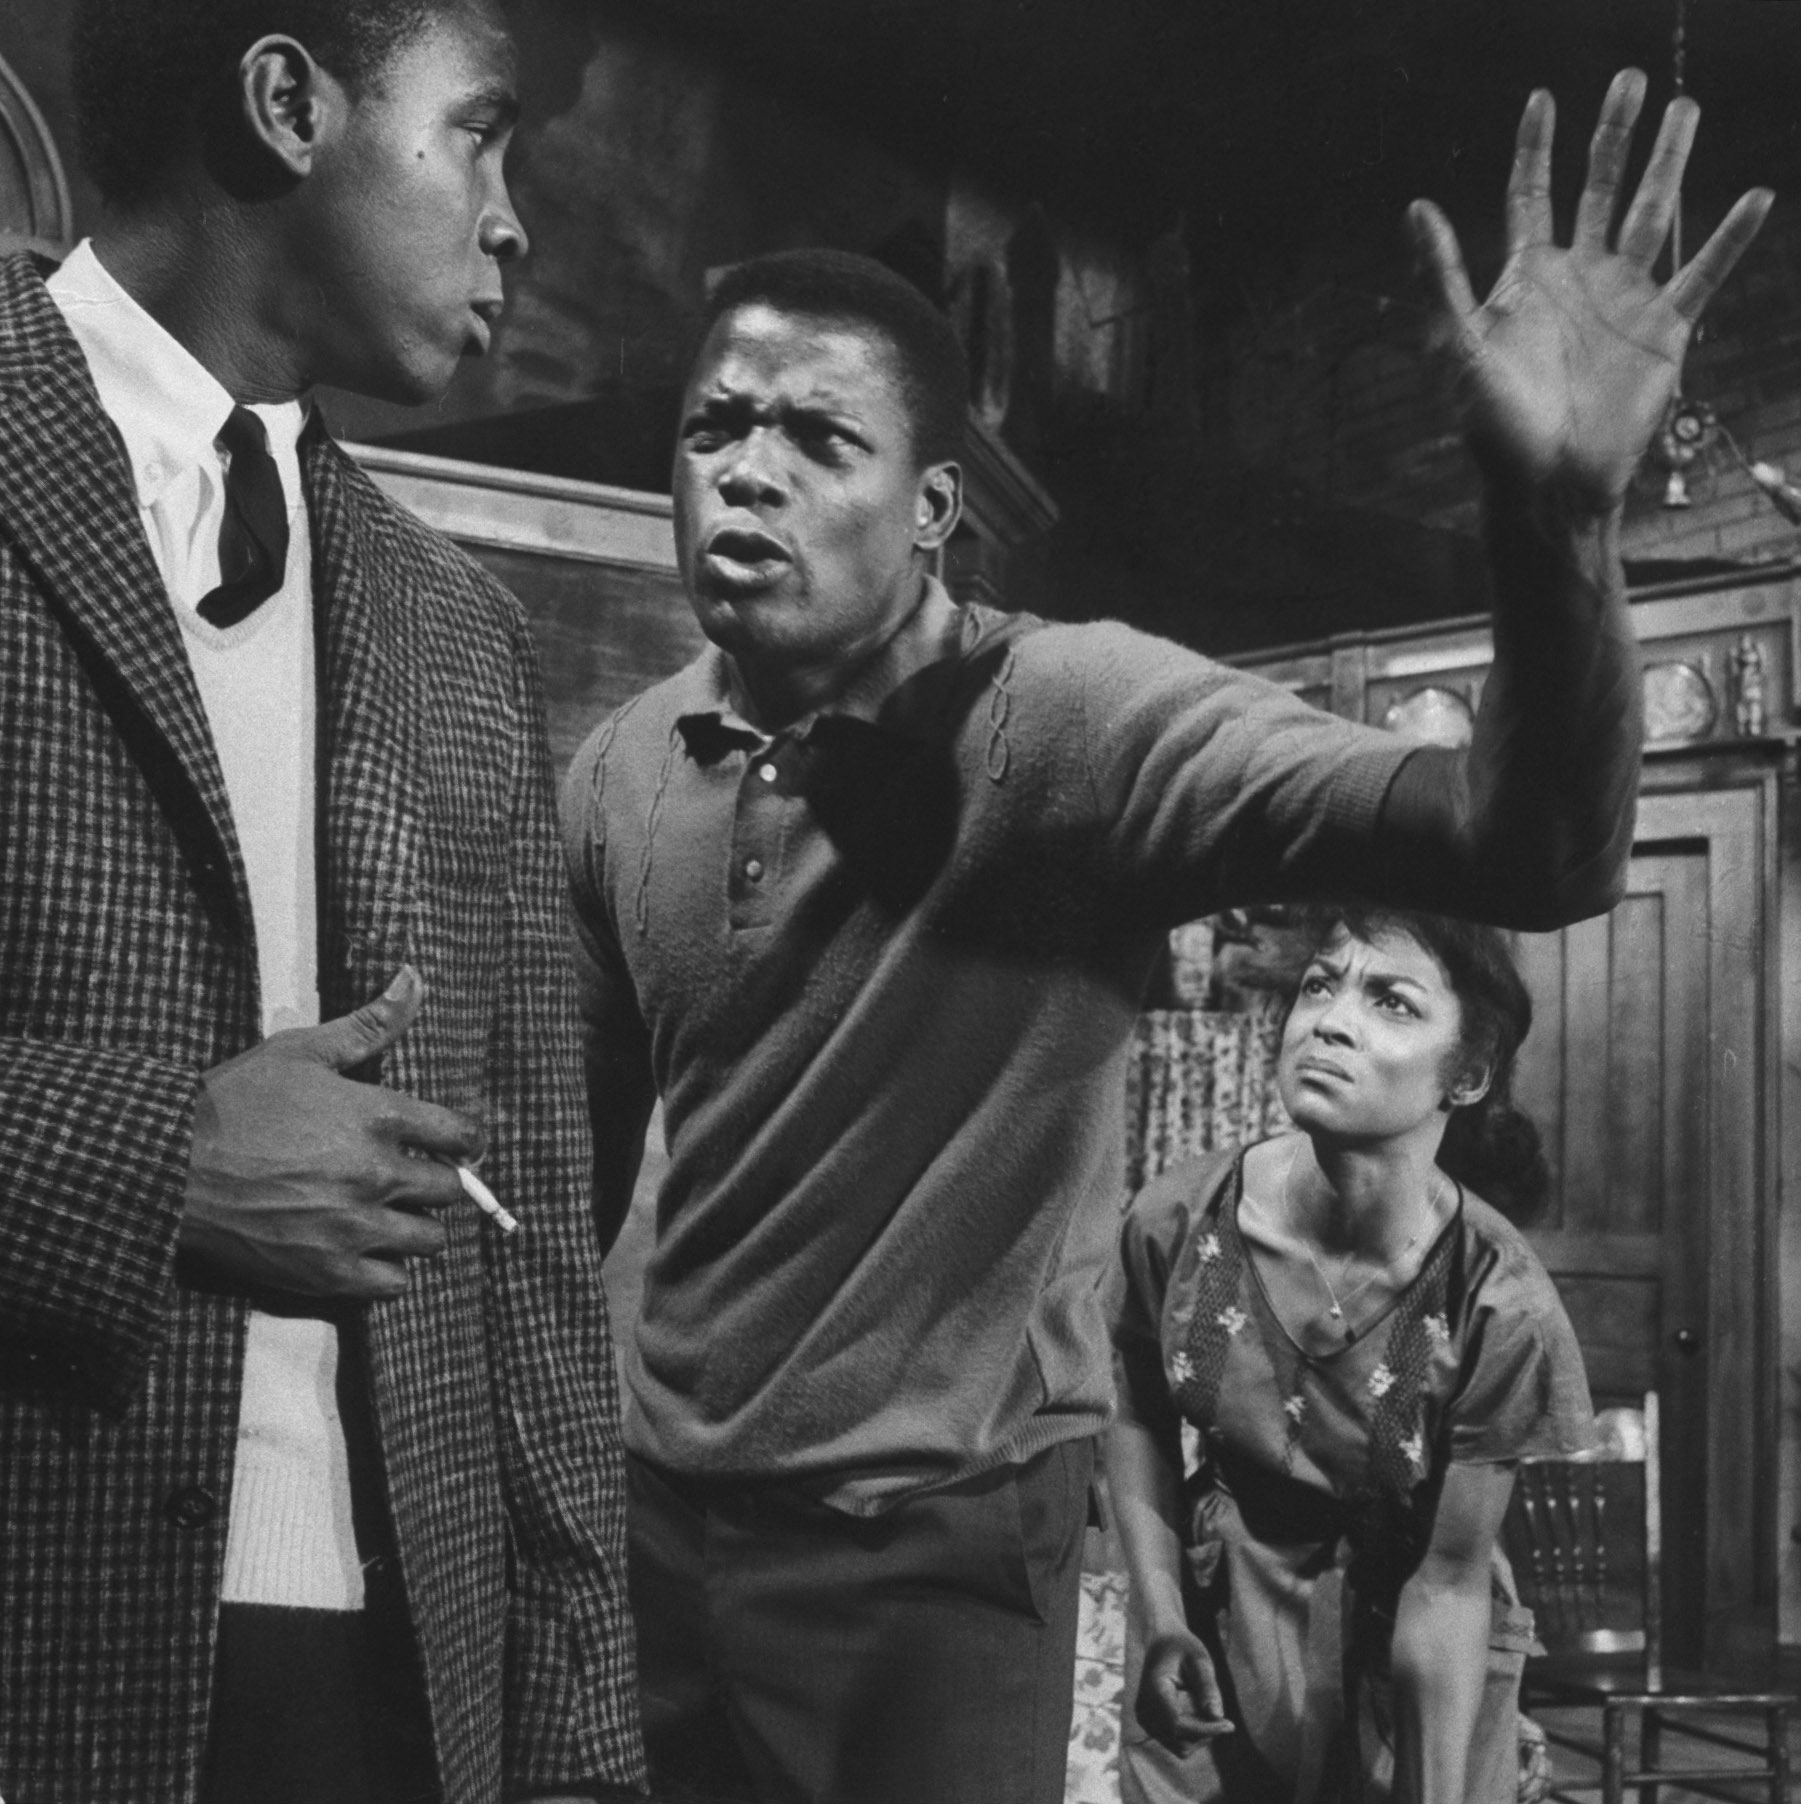 Sidney Poitier in the stage production of "A Raisin in the Sun" in 1959